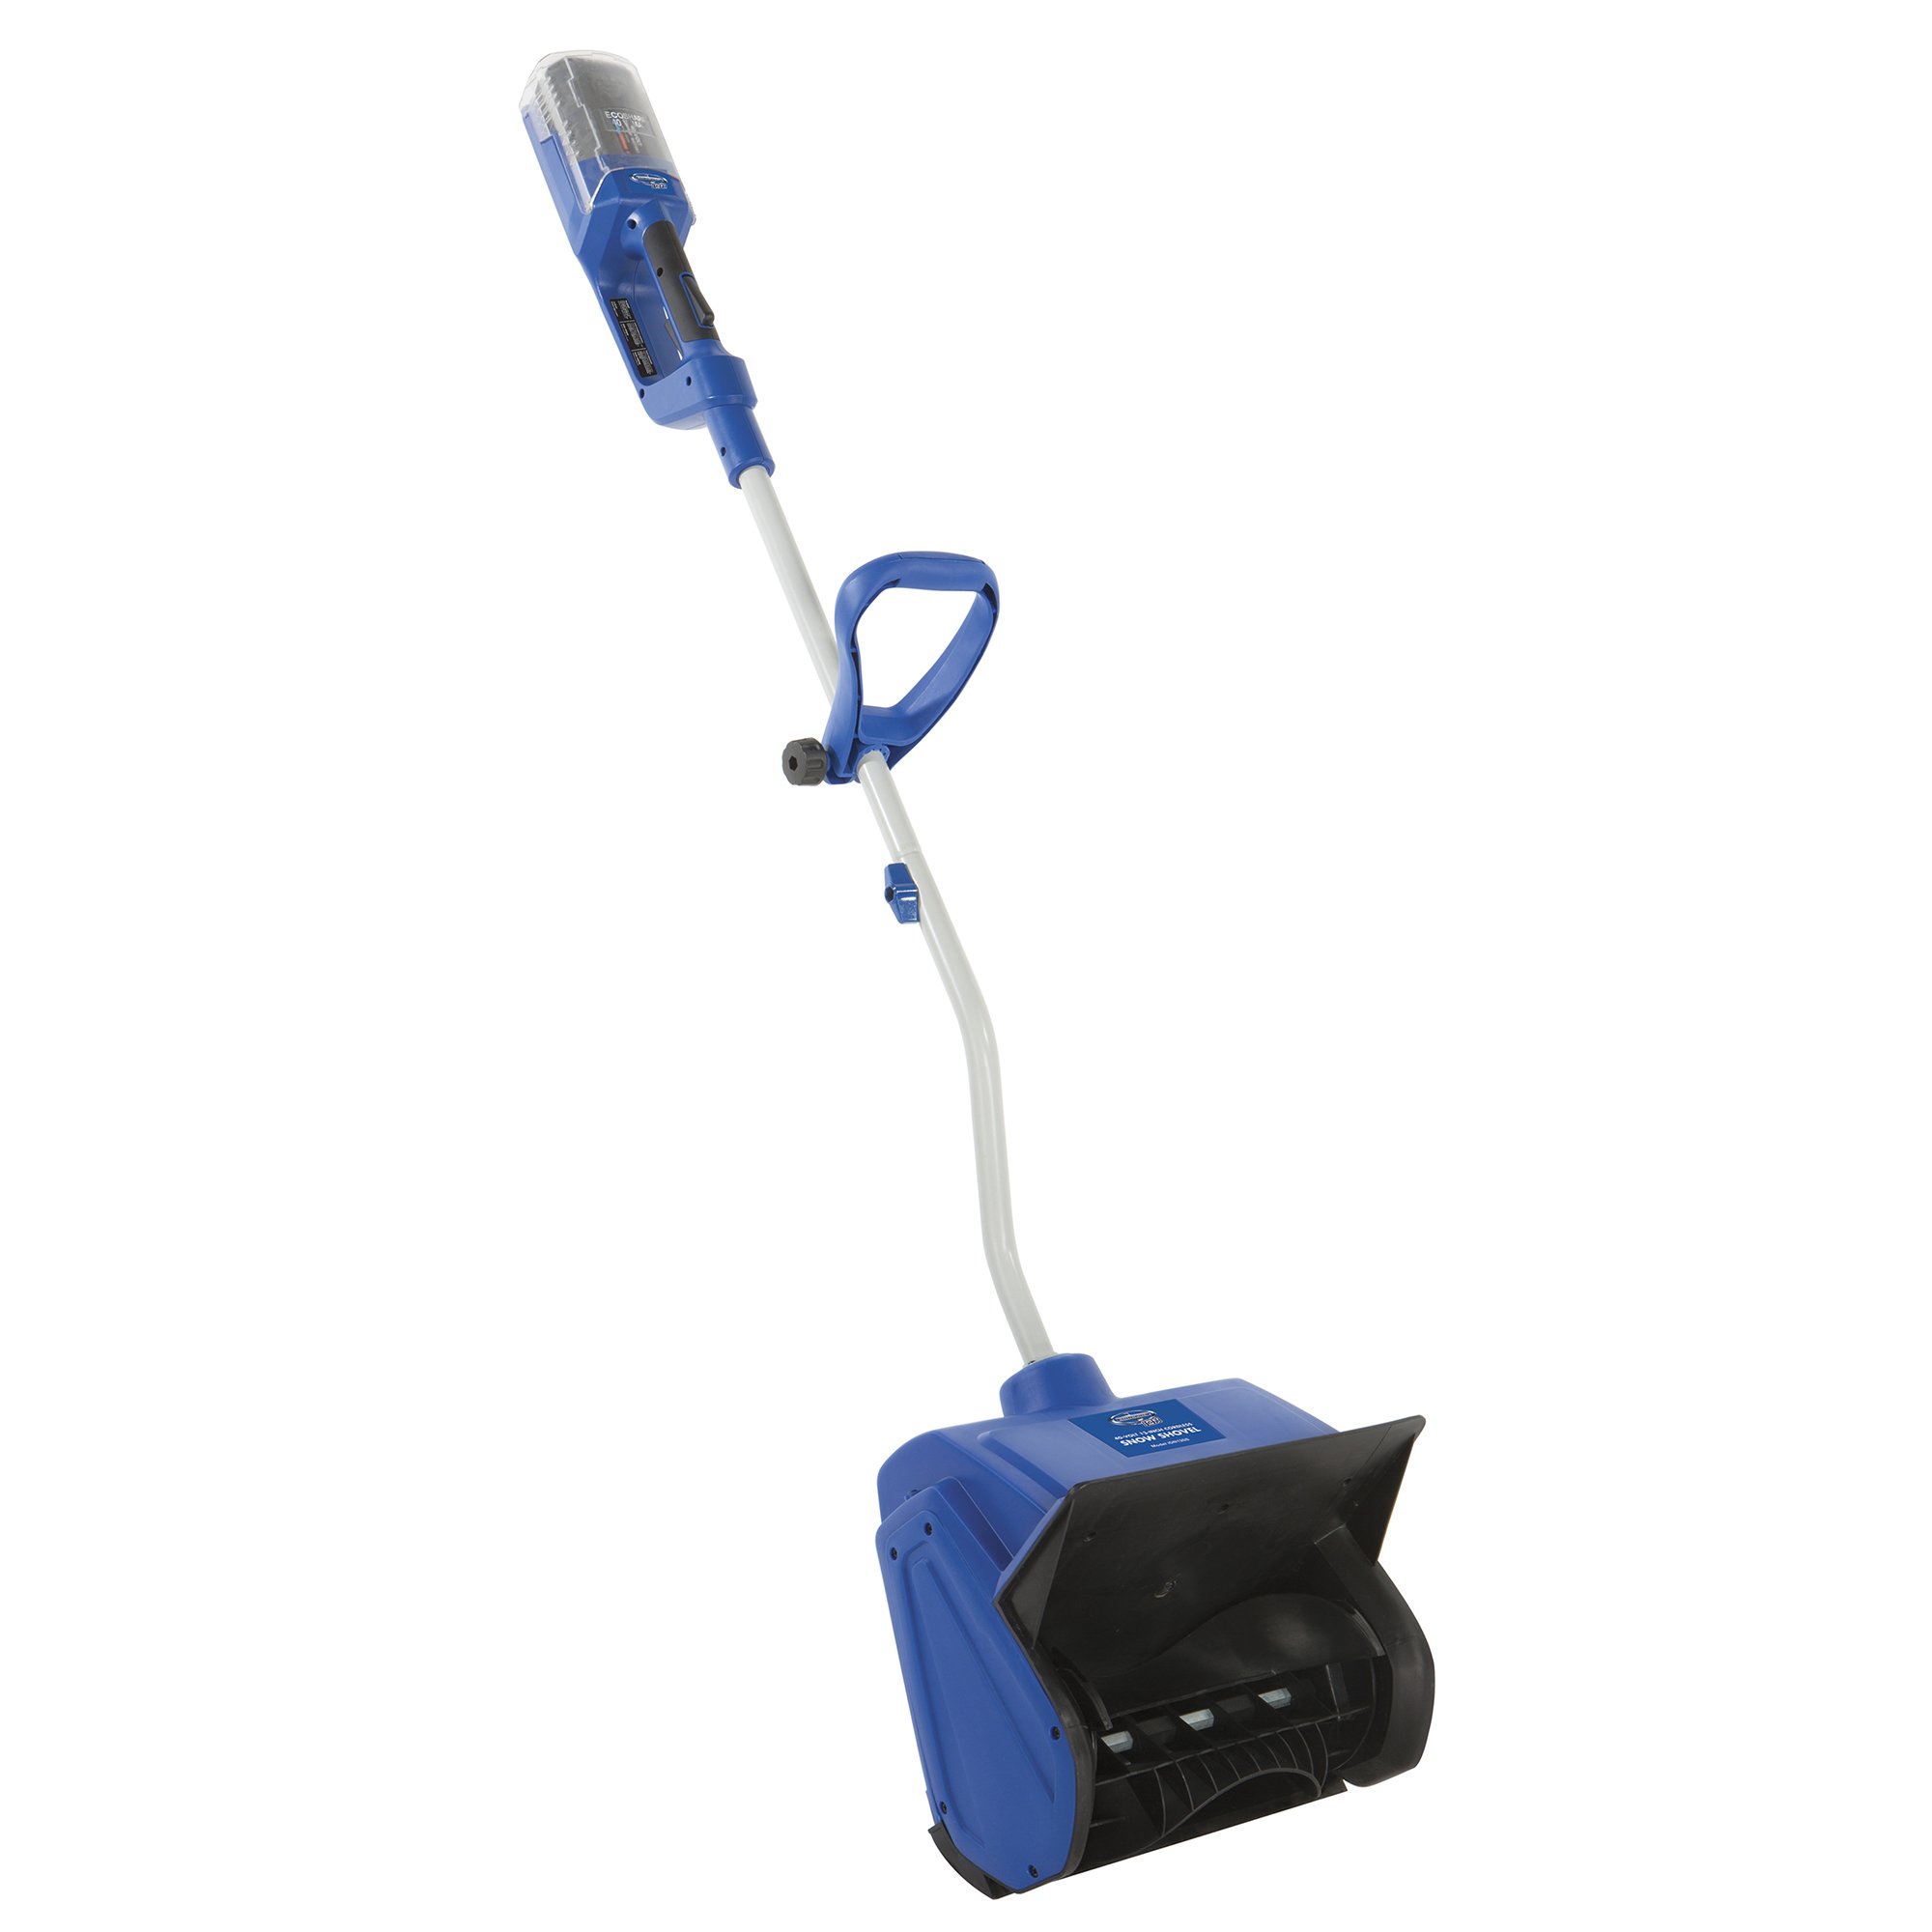 Snow Joe iON13SS 40-Volt iONMAX Cordless Brushless Snow Shovel Kit, 13-Inch, W/ 4.0-Ah Battery and Charger - image 4 of 8